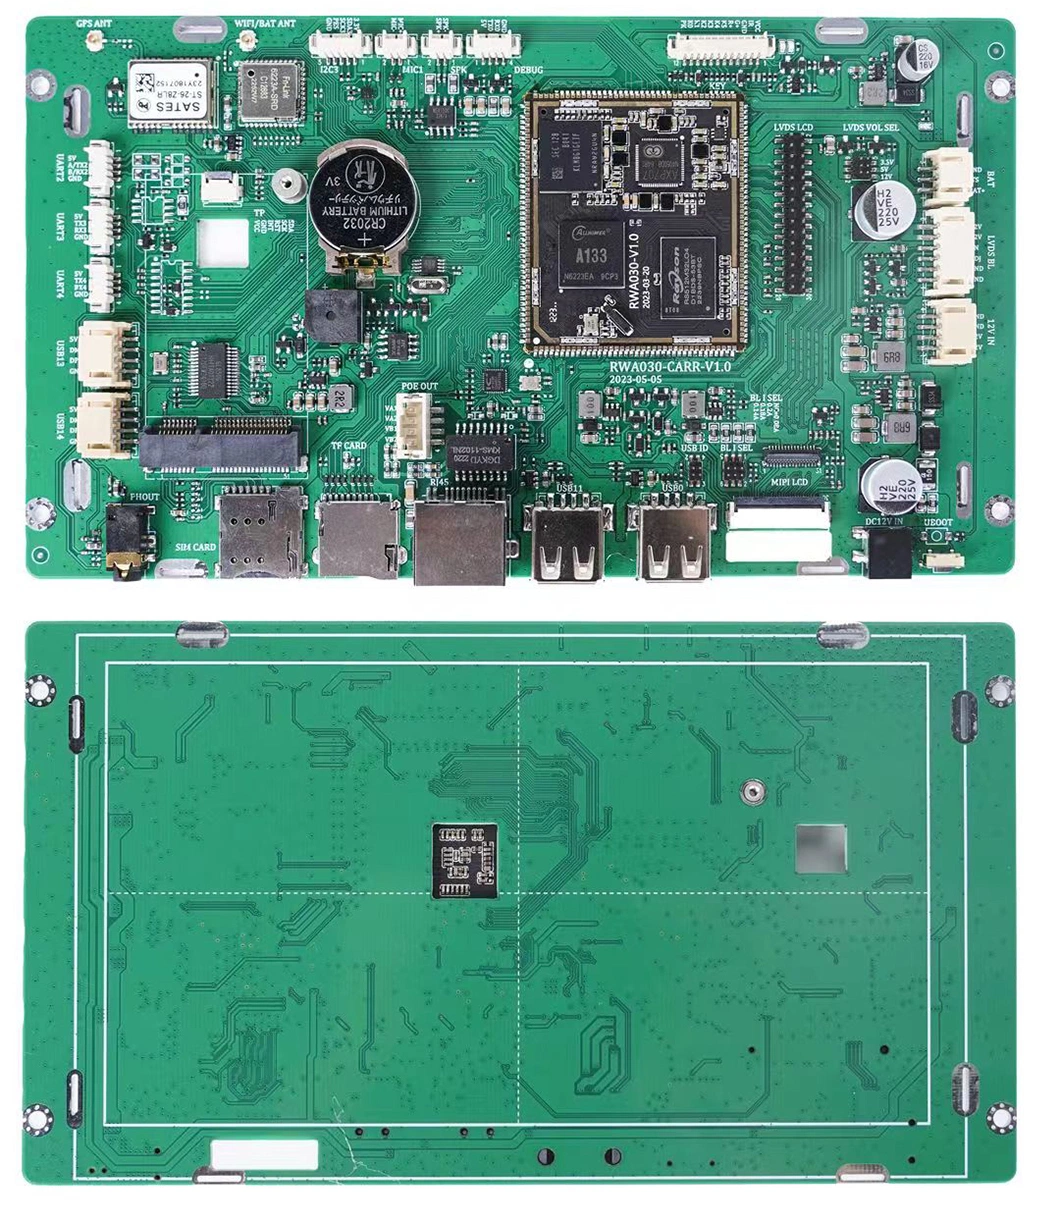 7 Inch Quad-Core Cortex-A53 Architecture Processor 1.5GHz A133 Motherboard Touch Panel for Industrial Control Equipment